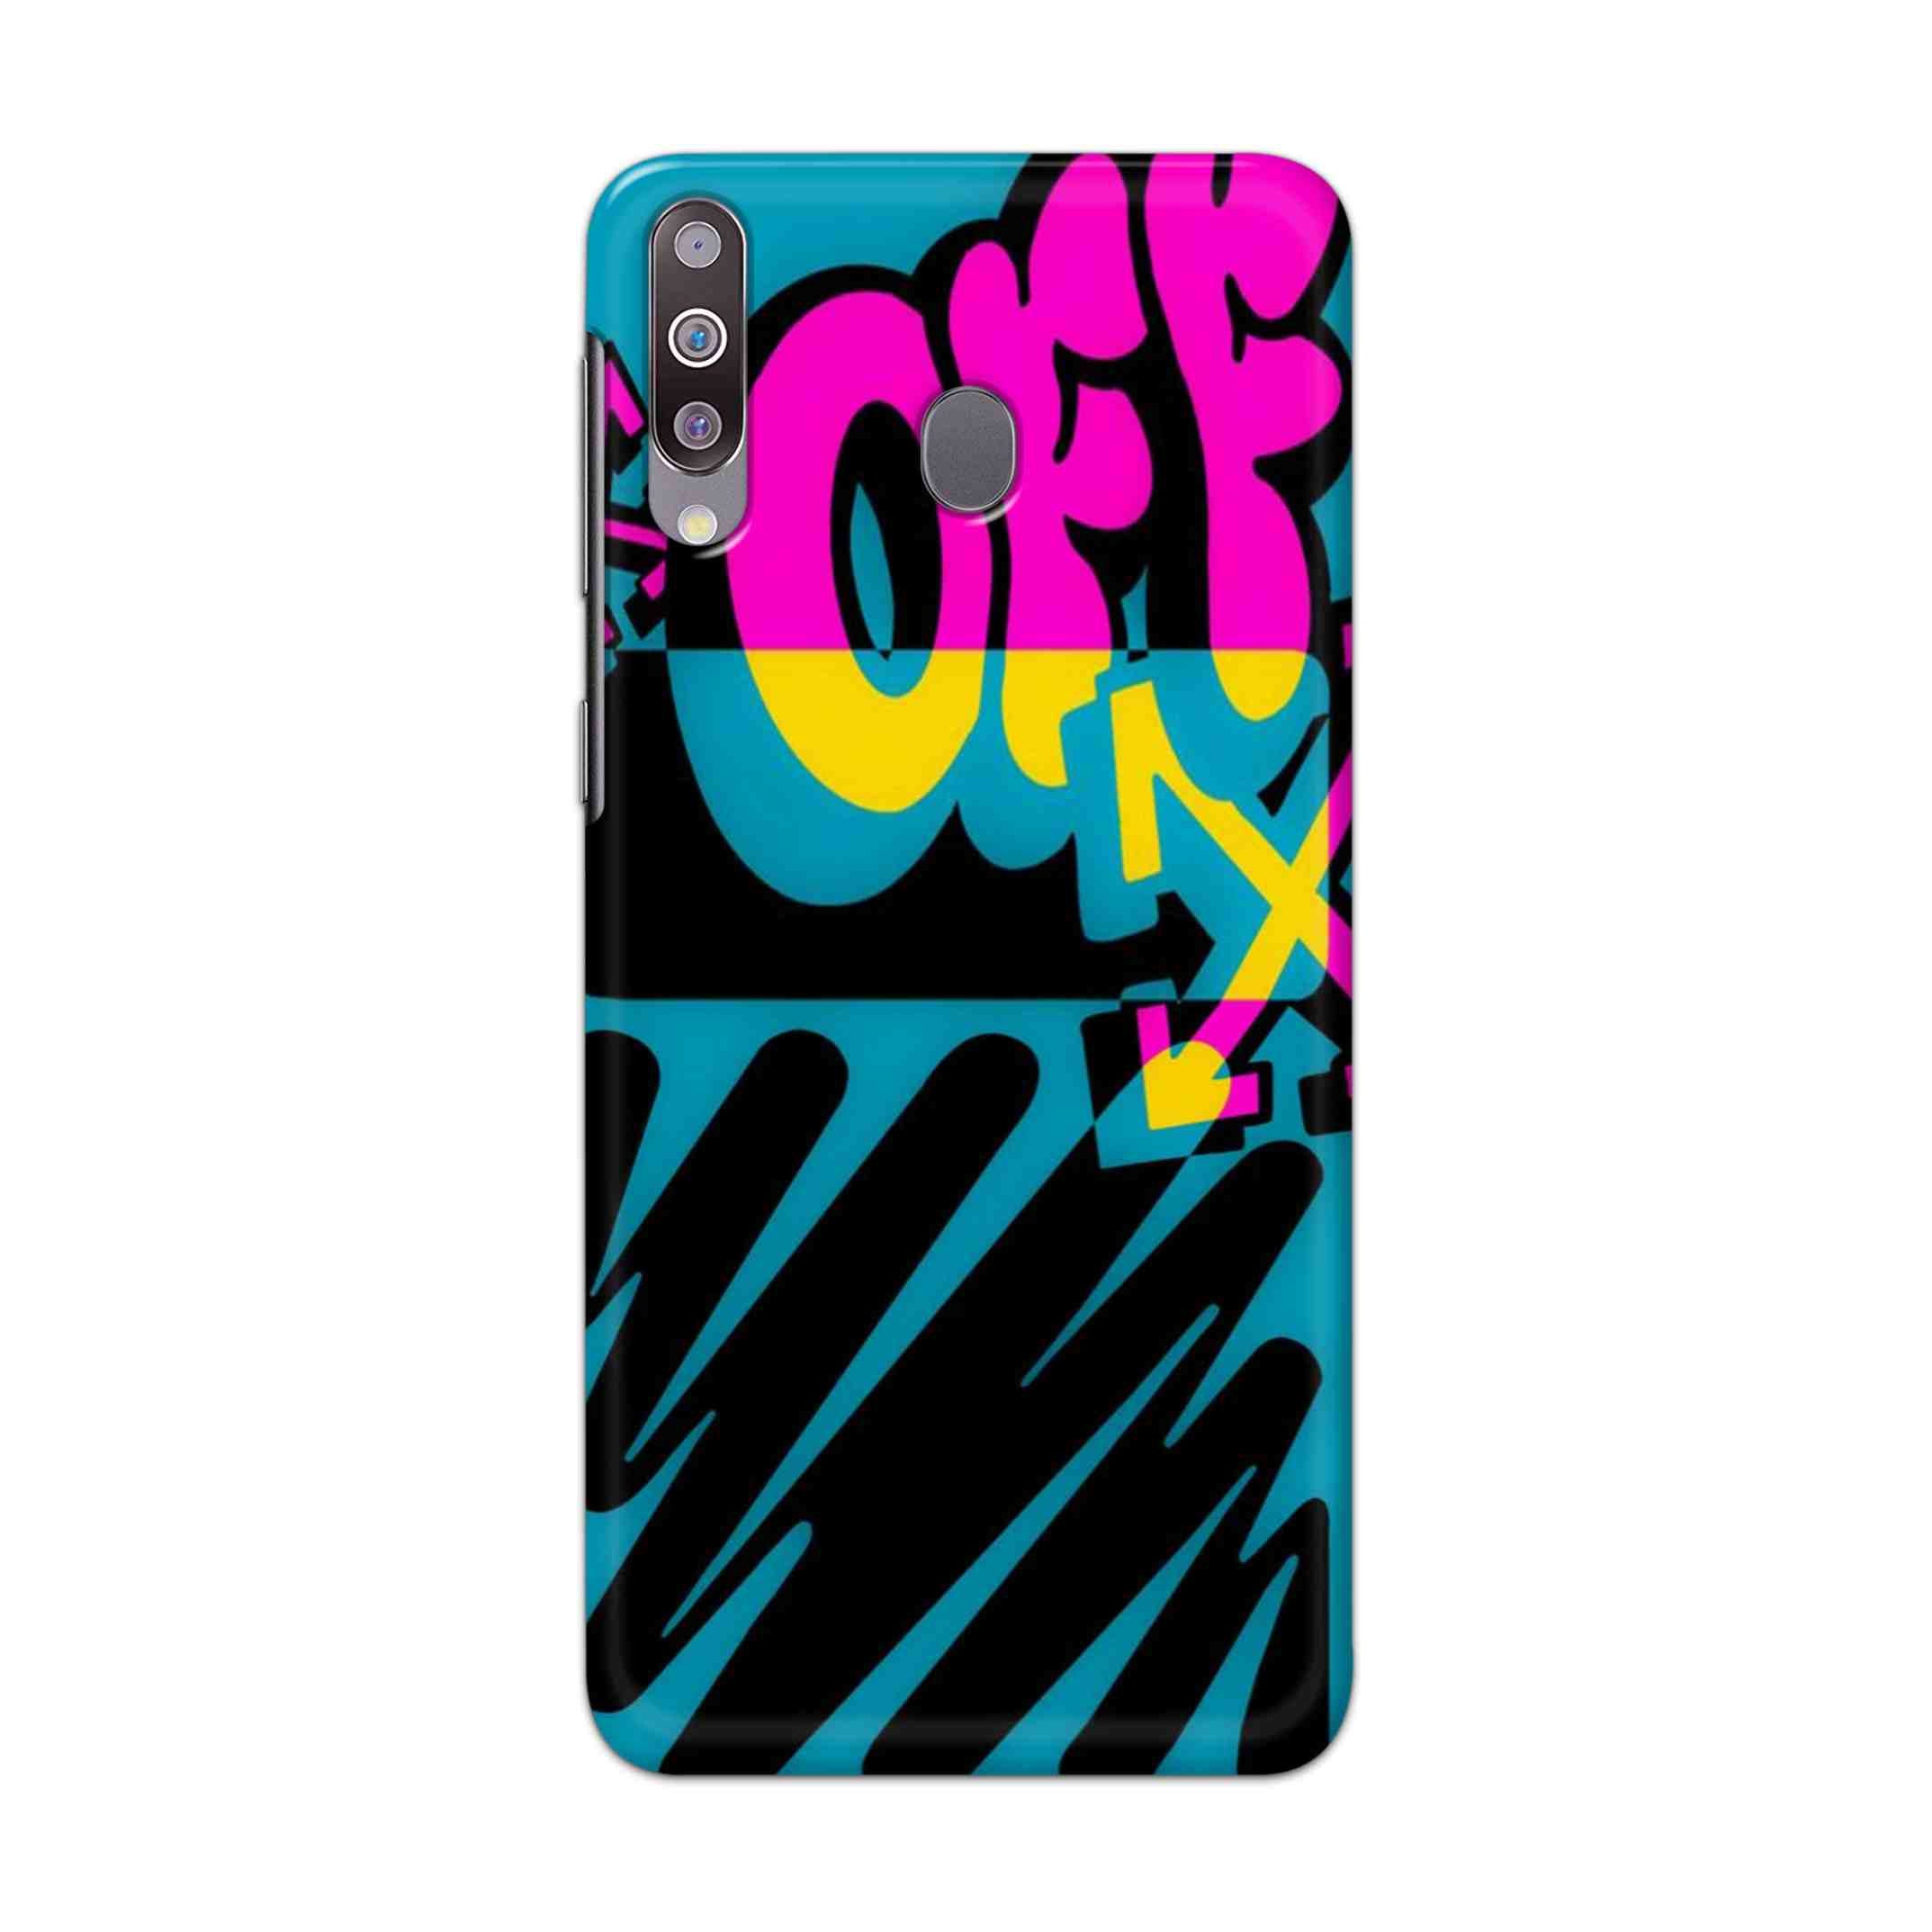 Buy Off Hard Back Mobile Phone Case Cover For Samsung Galaxy M30 Online